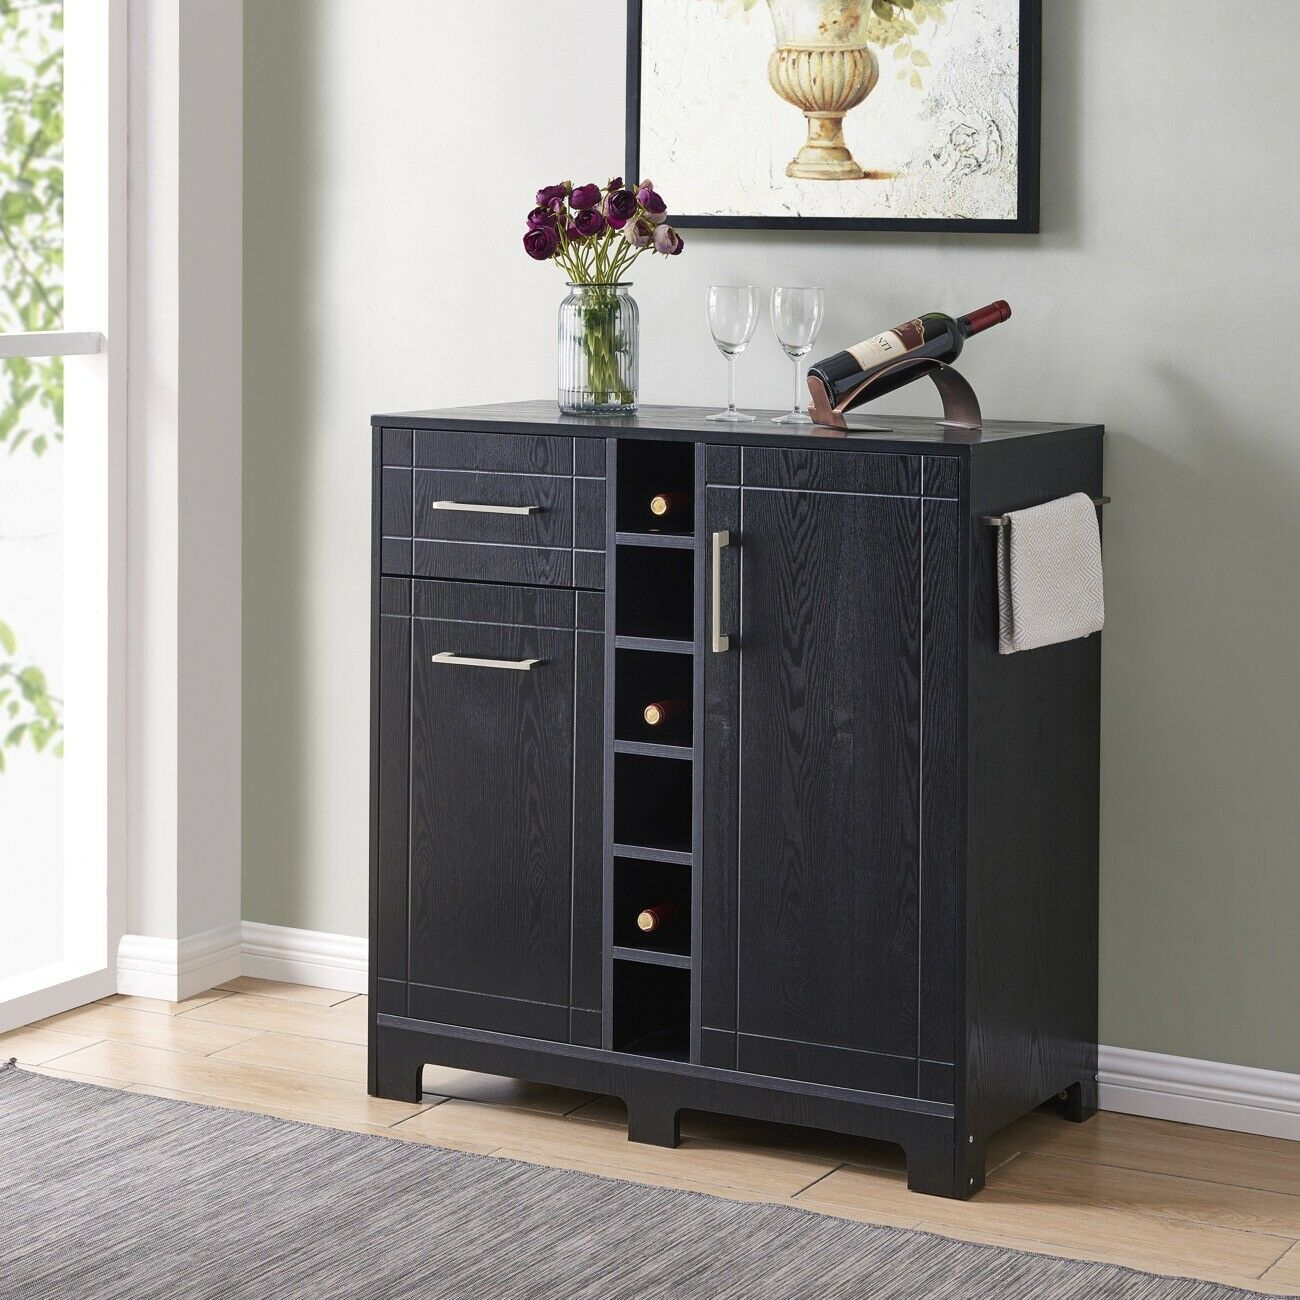 Vietti Home Bar Cabinet With Bottle Glass Storage Drawers In Black Oak Finish pertaining to sizing 1300 X 1300